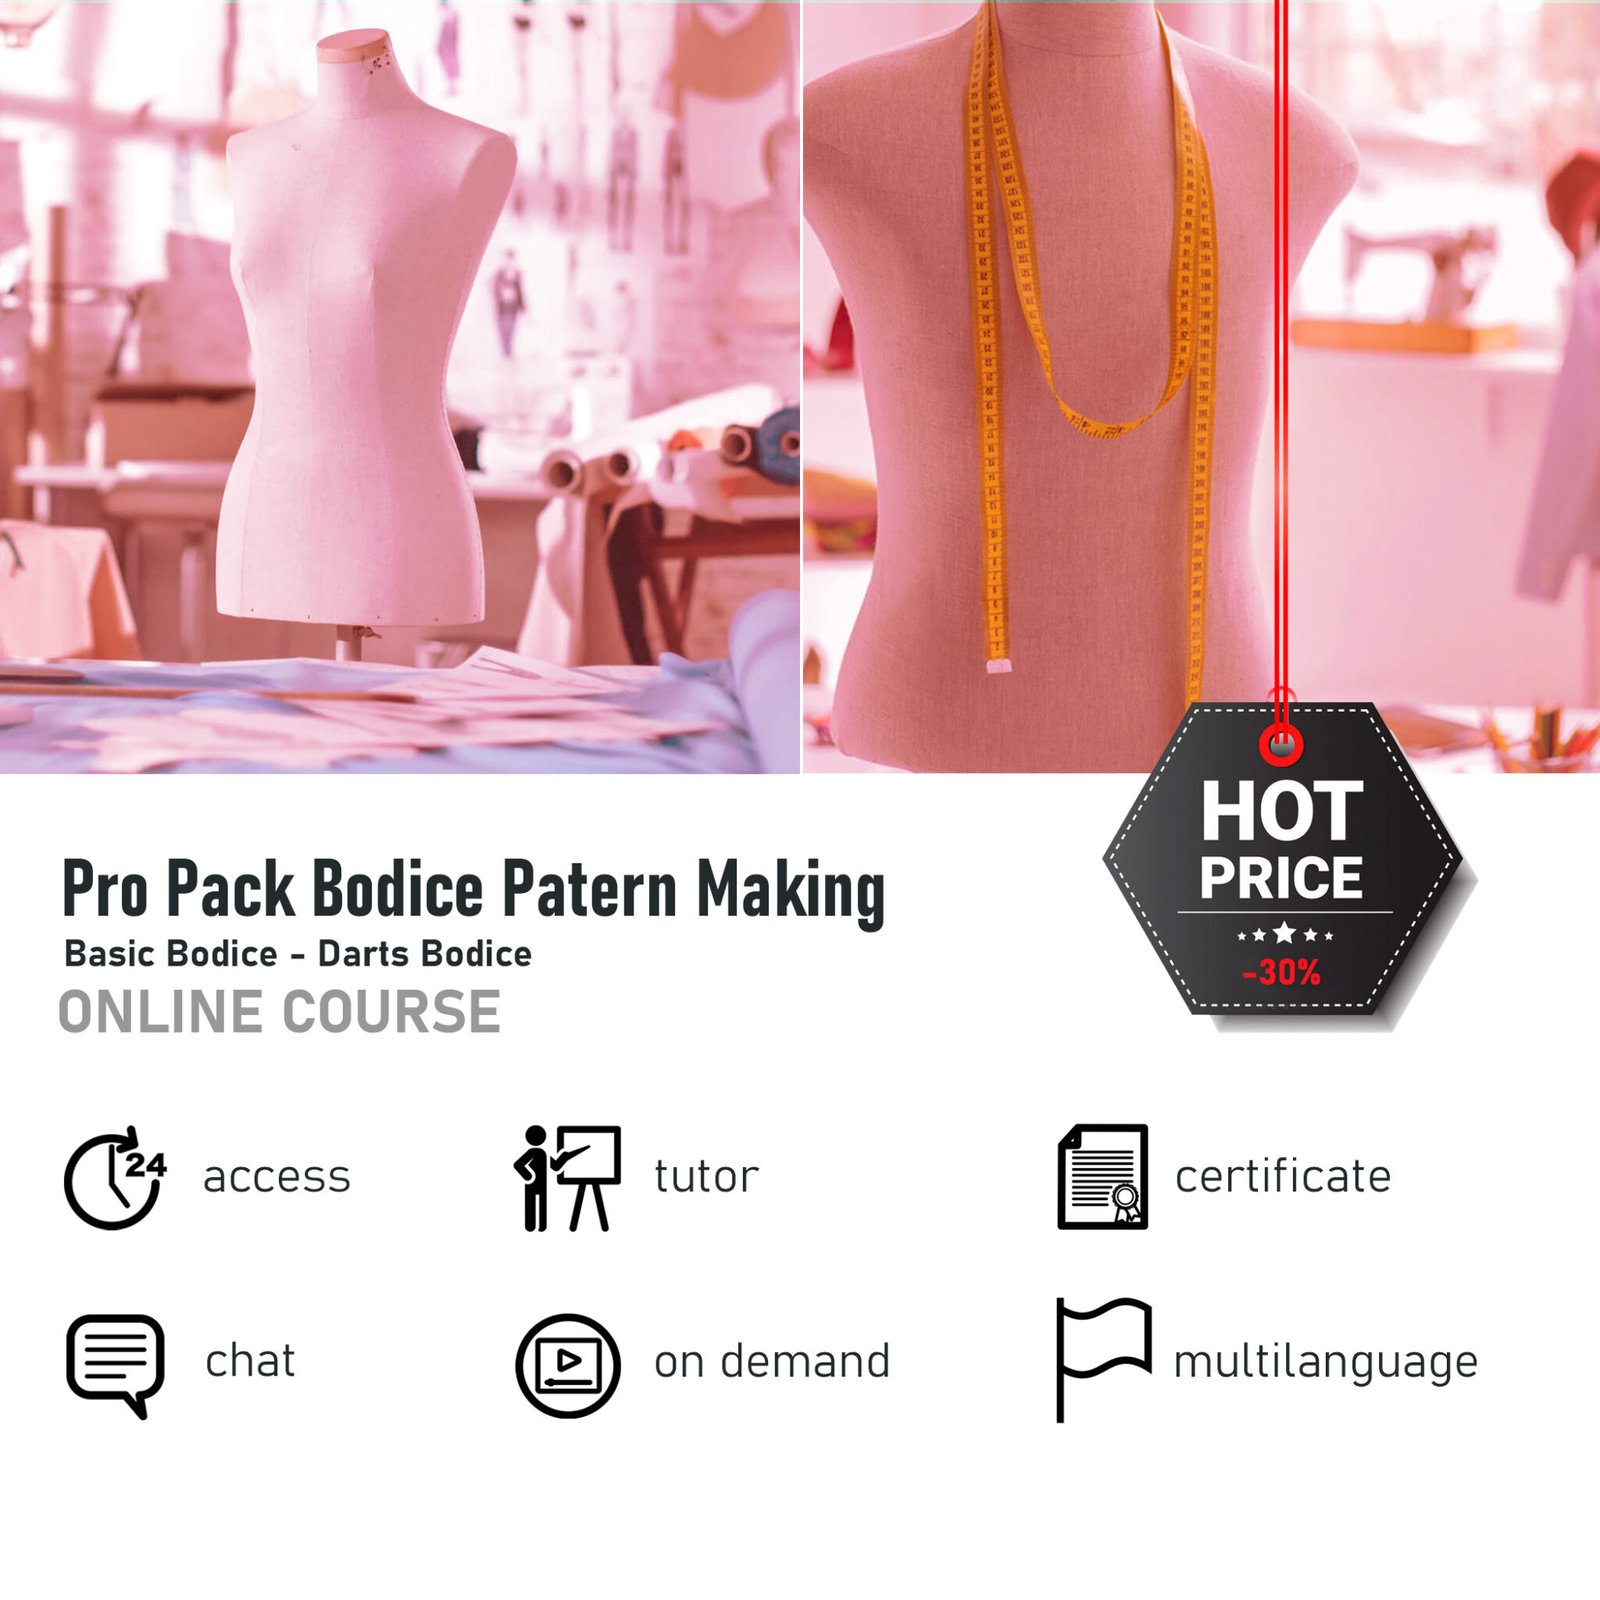 Pro Pack 30% Bodice Tailoring Patterns fashion academy,pattern maker courses,online courses,pattern maker,tailoring patterns pro pack bodice pattern making course